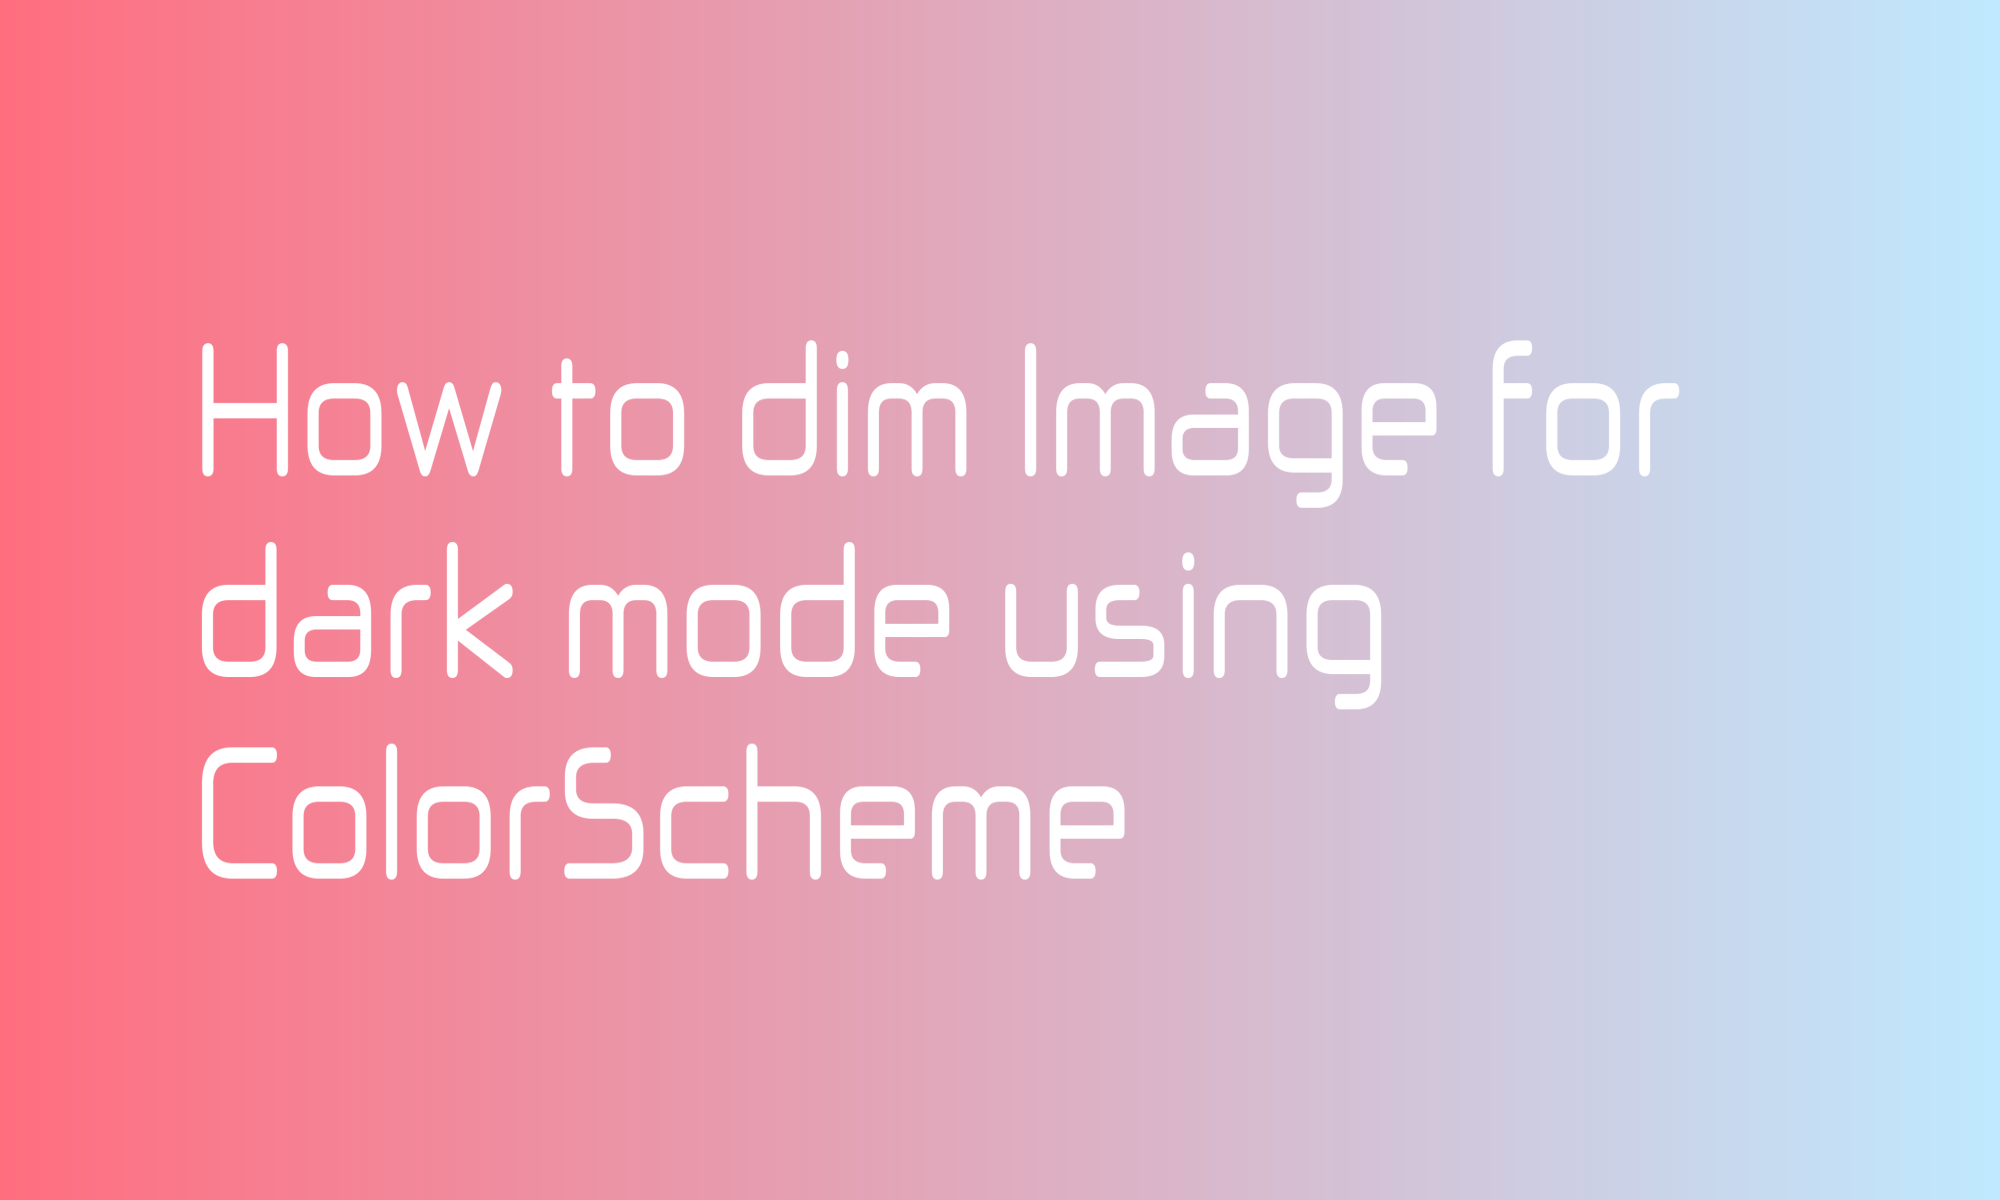 How to dim Image for dark mode using ColorScheme